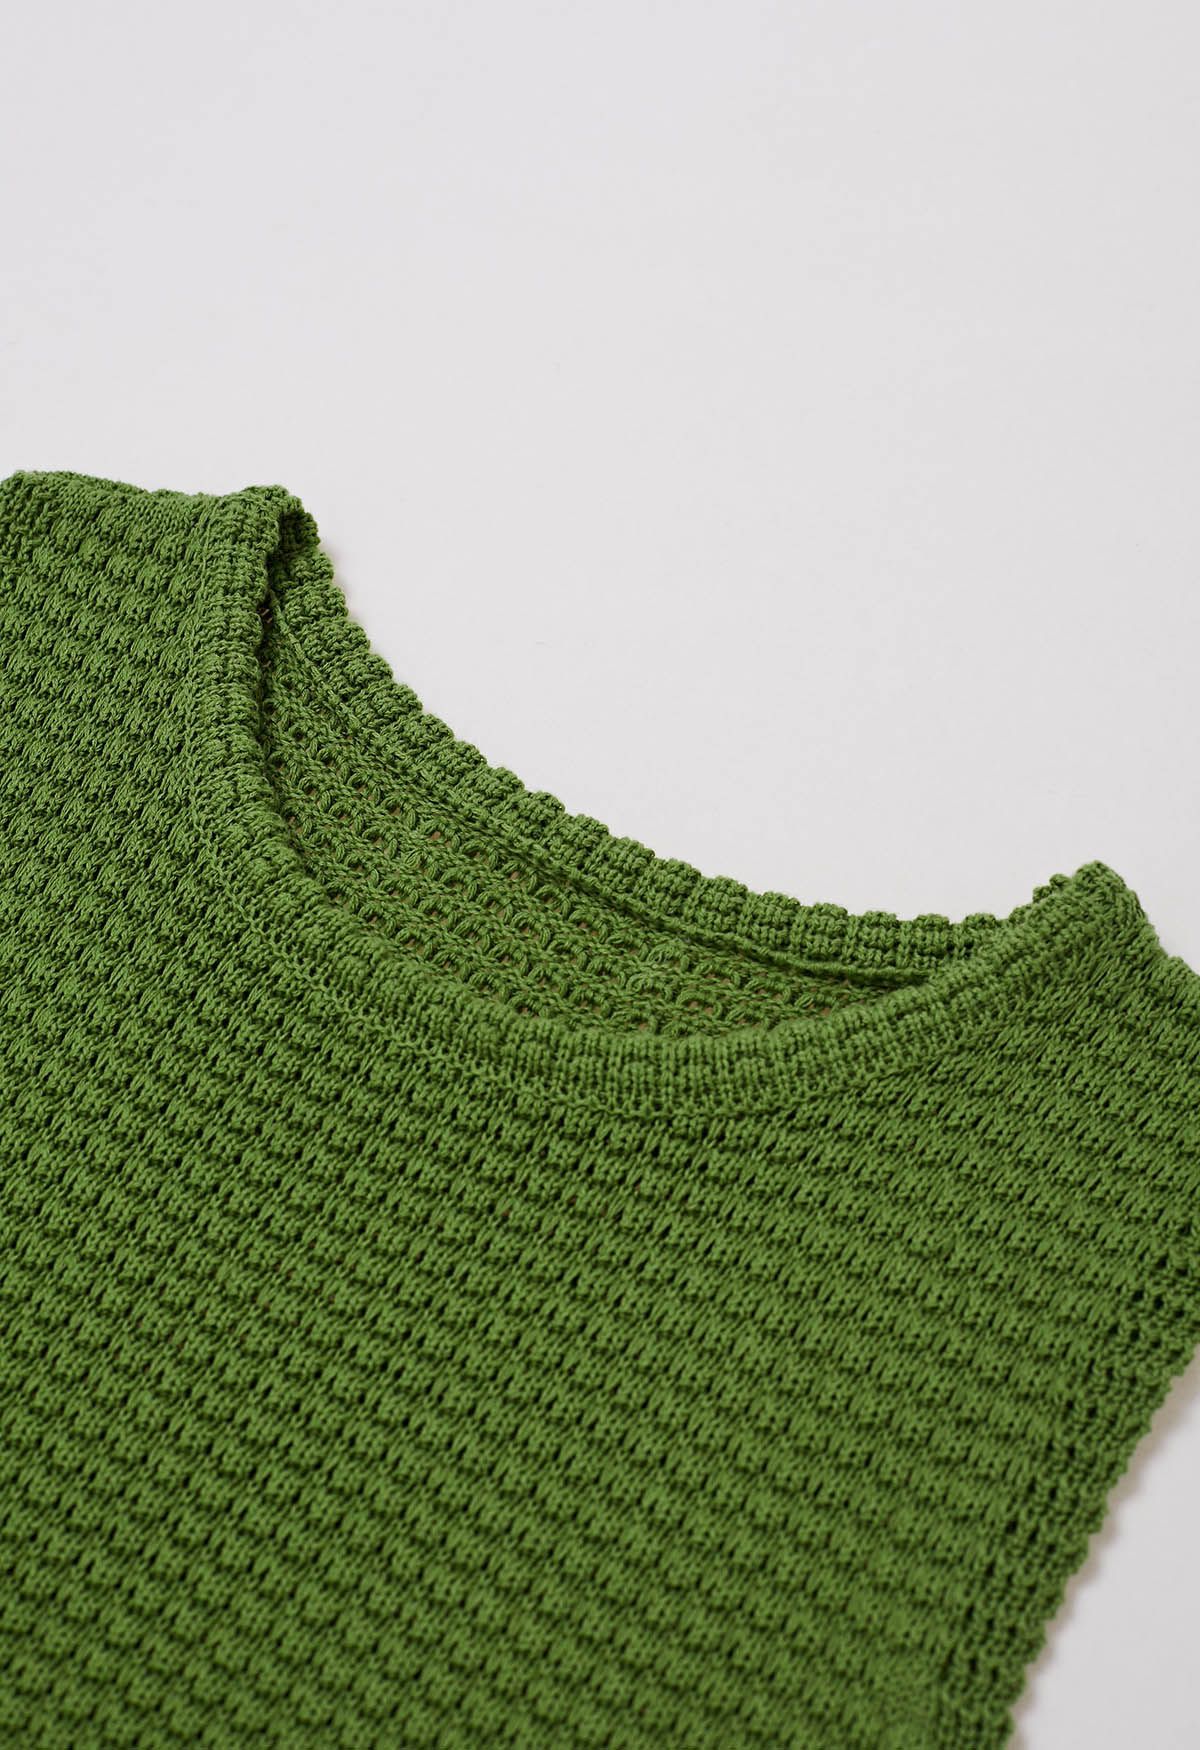 Solid Color Openwork Knit Sleeveless Top in Green